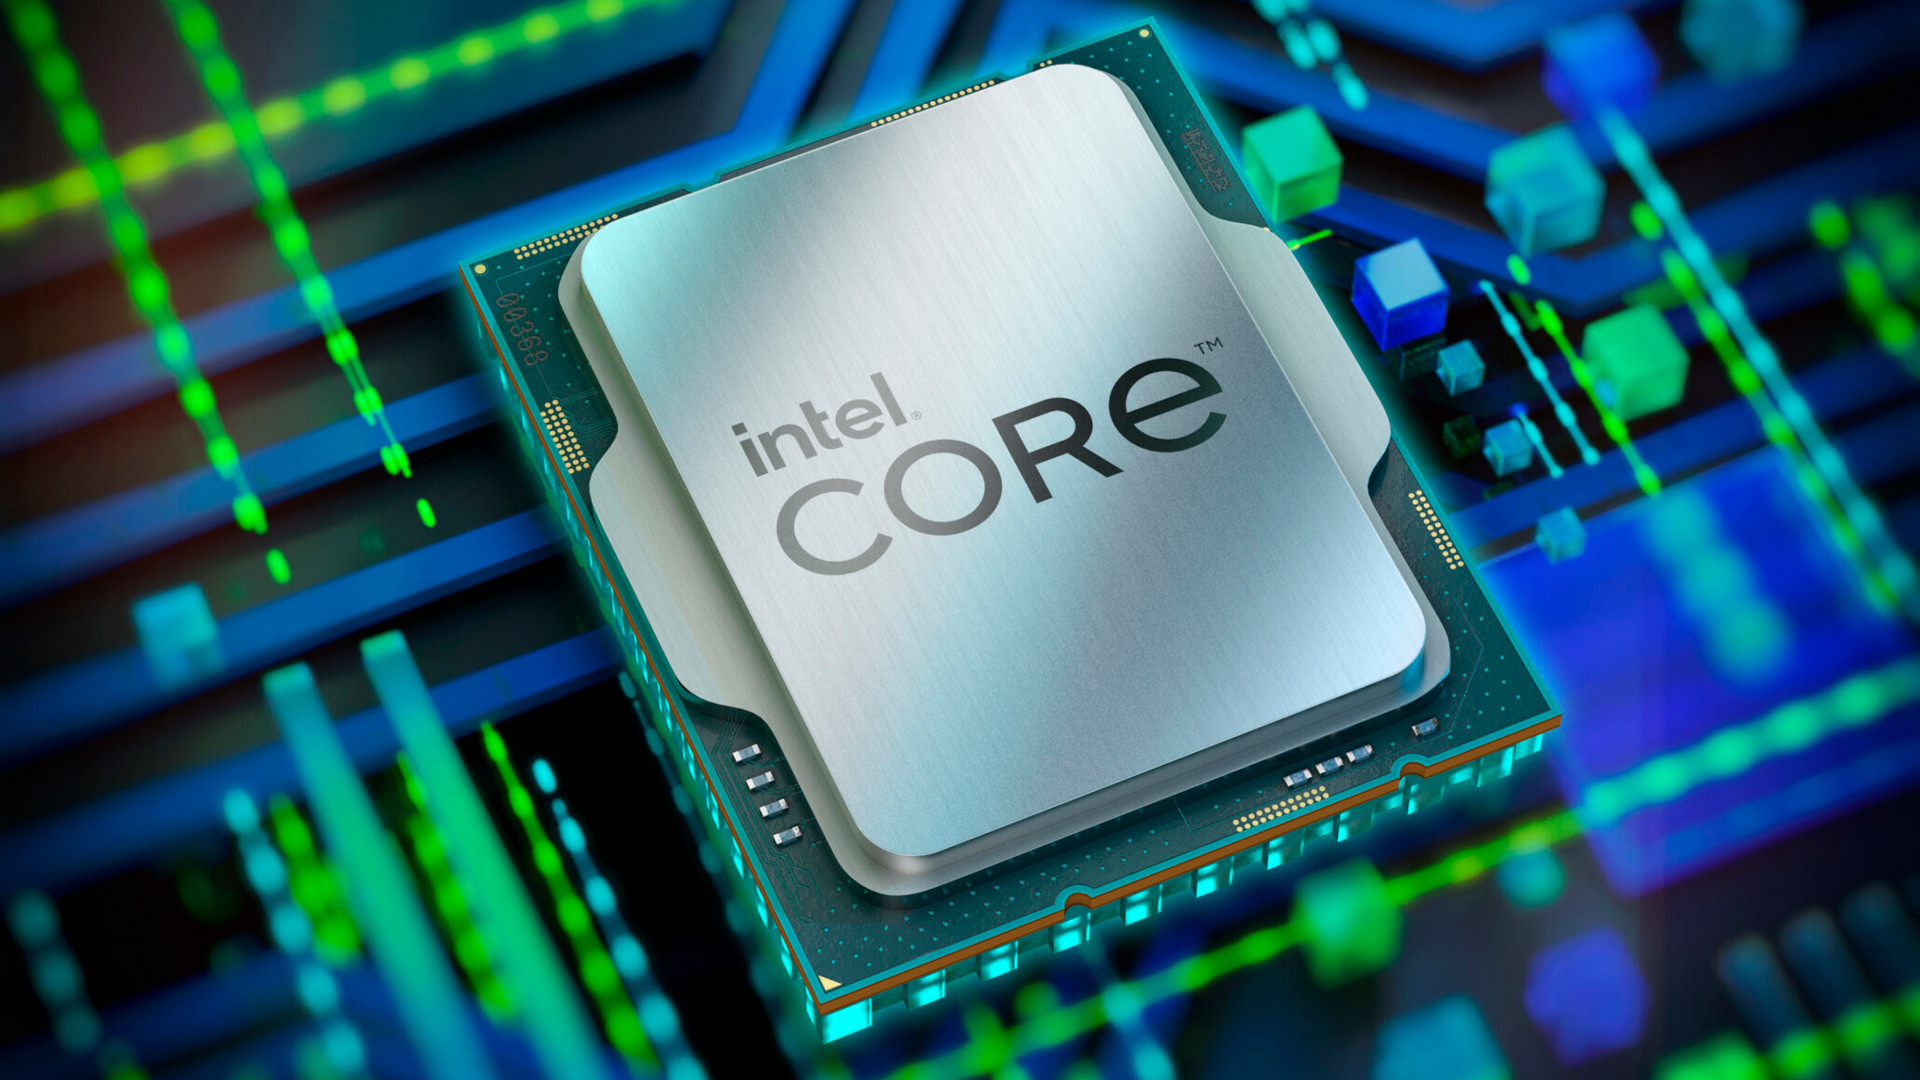 Intel Core CPUs maintain lead over AMD Ryzen among Steam users